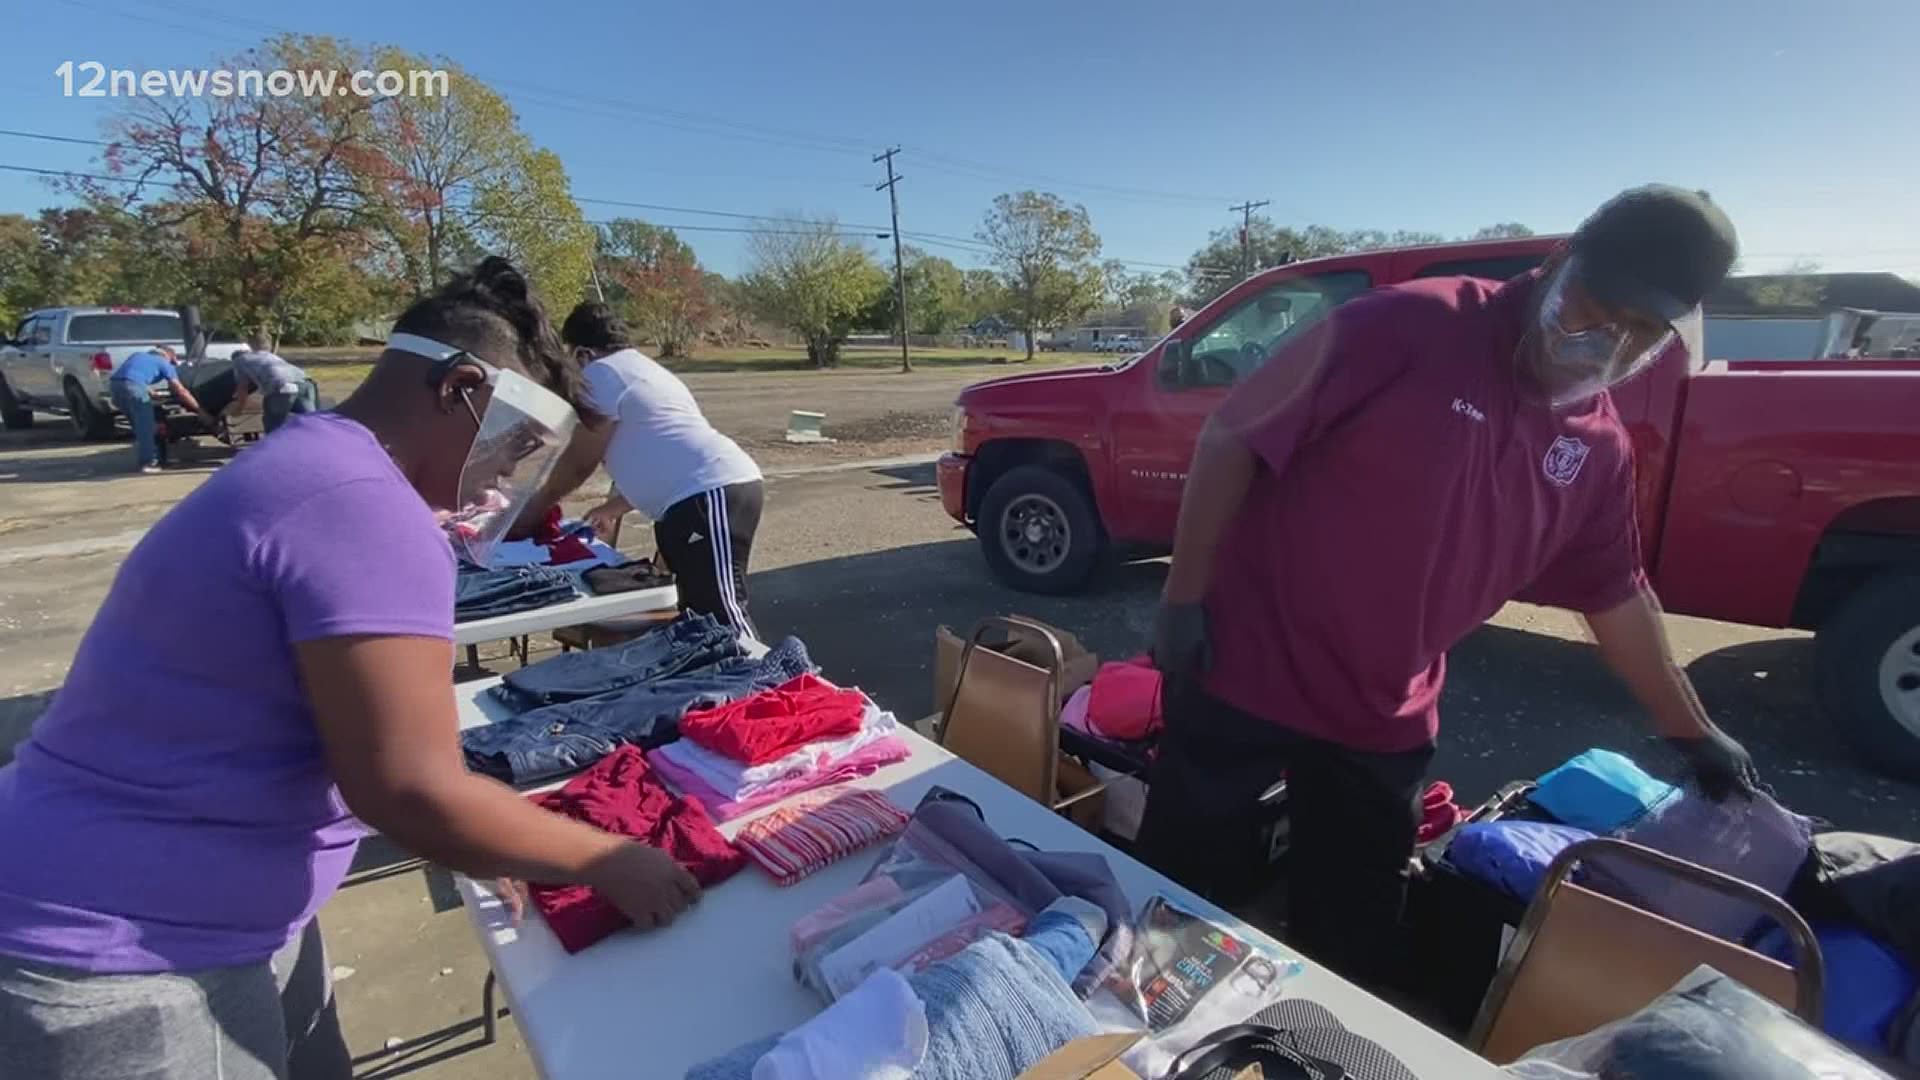 On Saturday morning, two brothers in Port Arthur held a Feed the Homeless event in the 900 block of 9th Avenue for those who have been displaced.